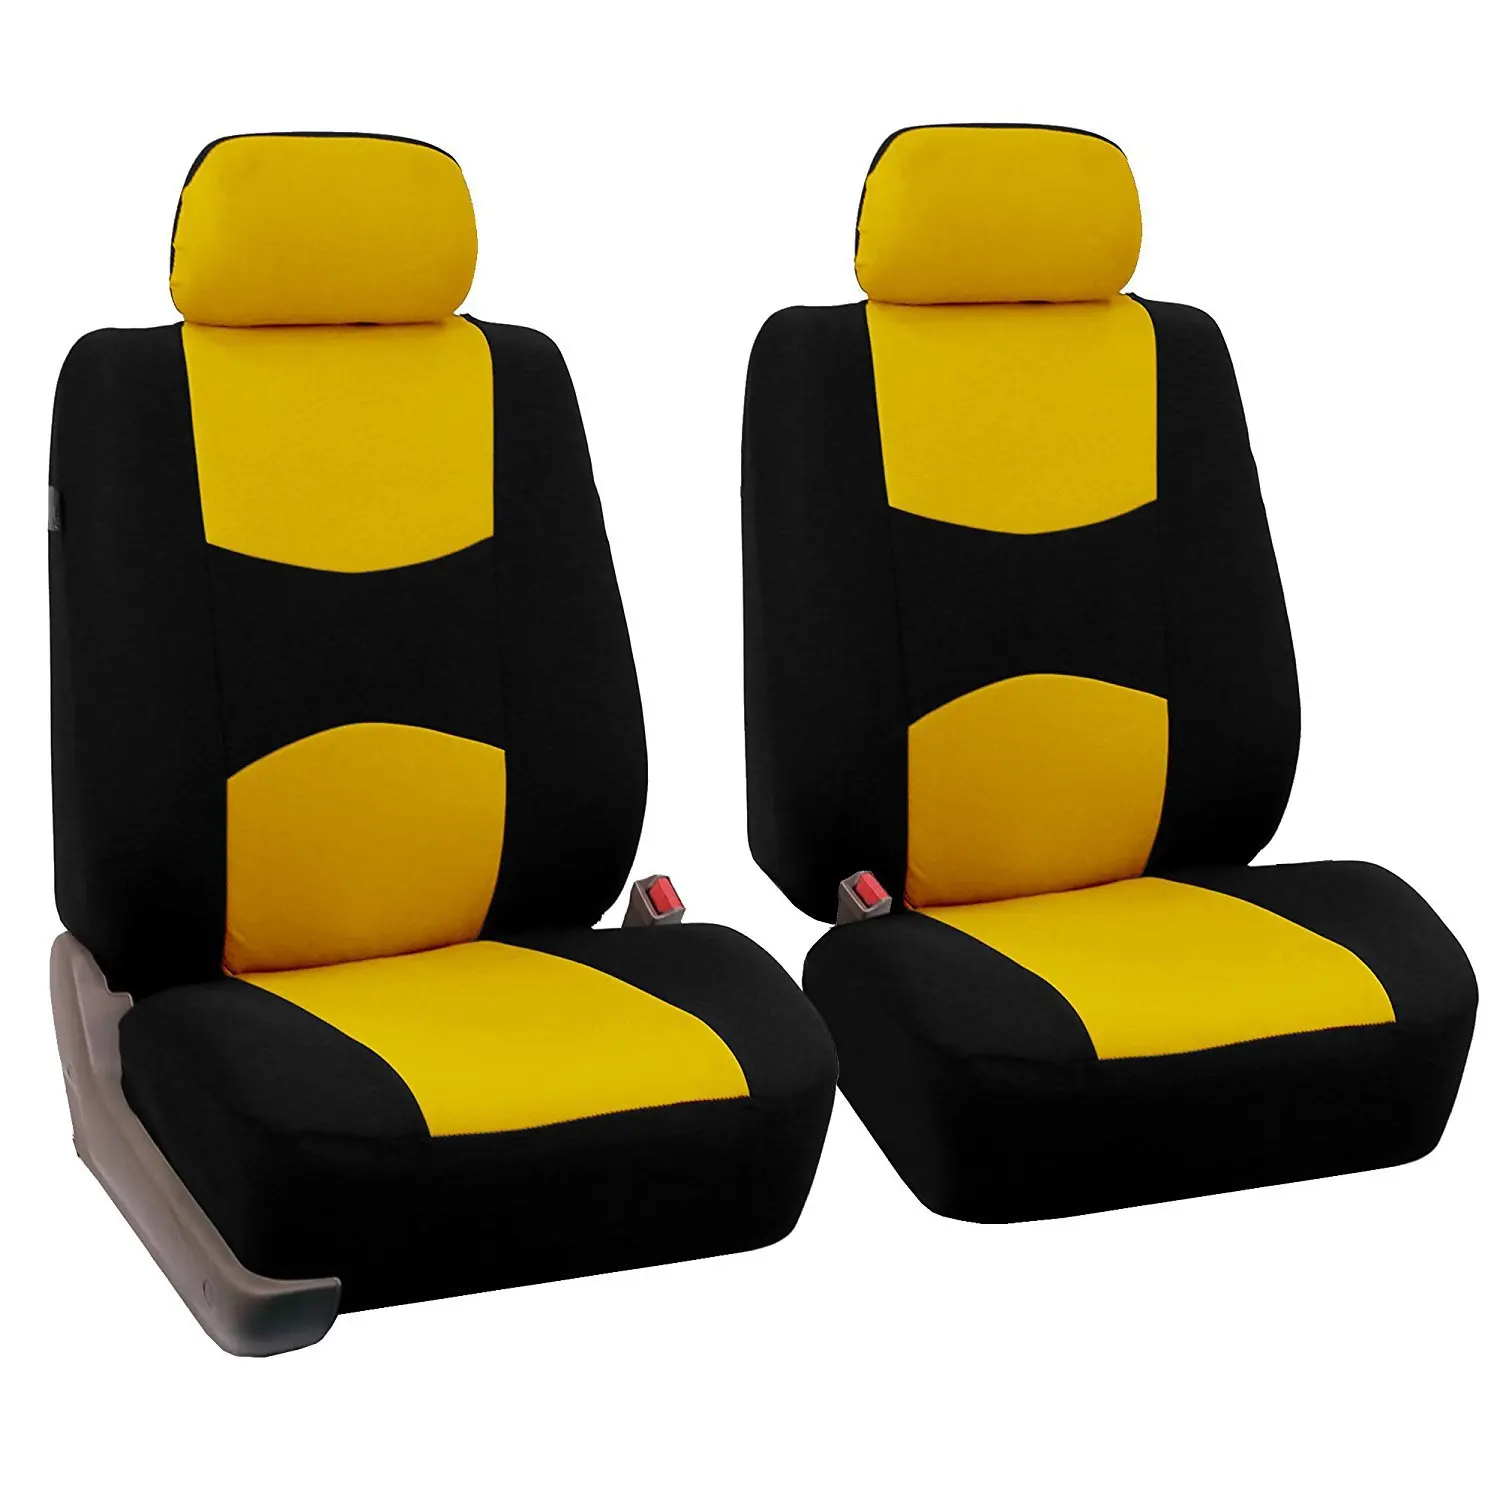 Supper Cheap  High Quality Polyester Fabric Universal Fit Pair Set Front Car Seat Covers